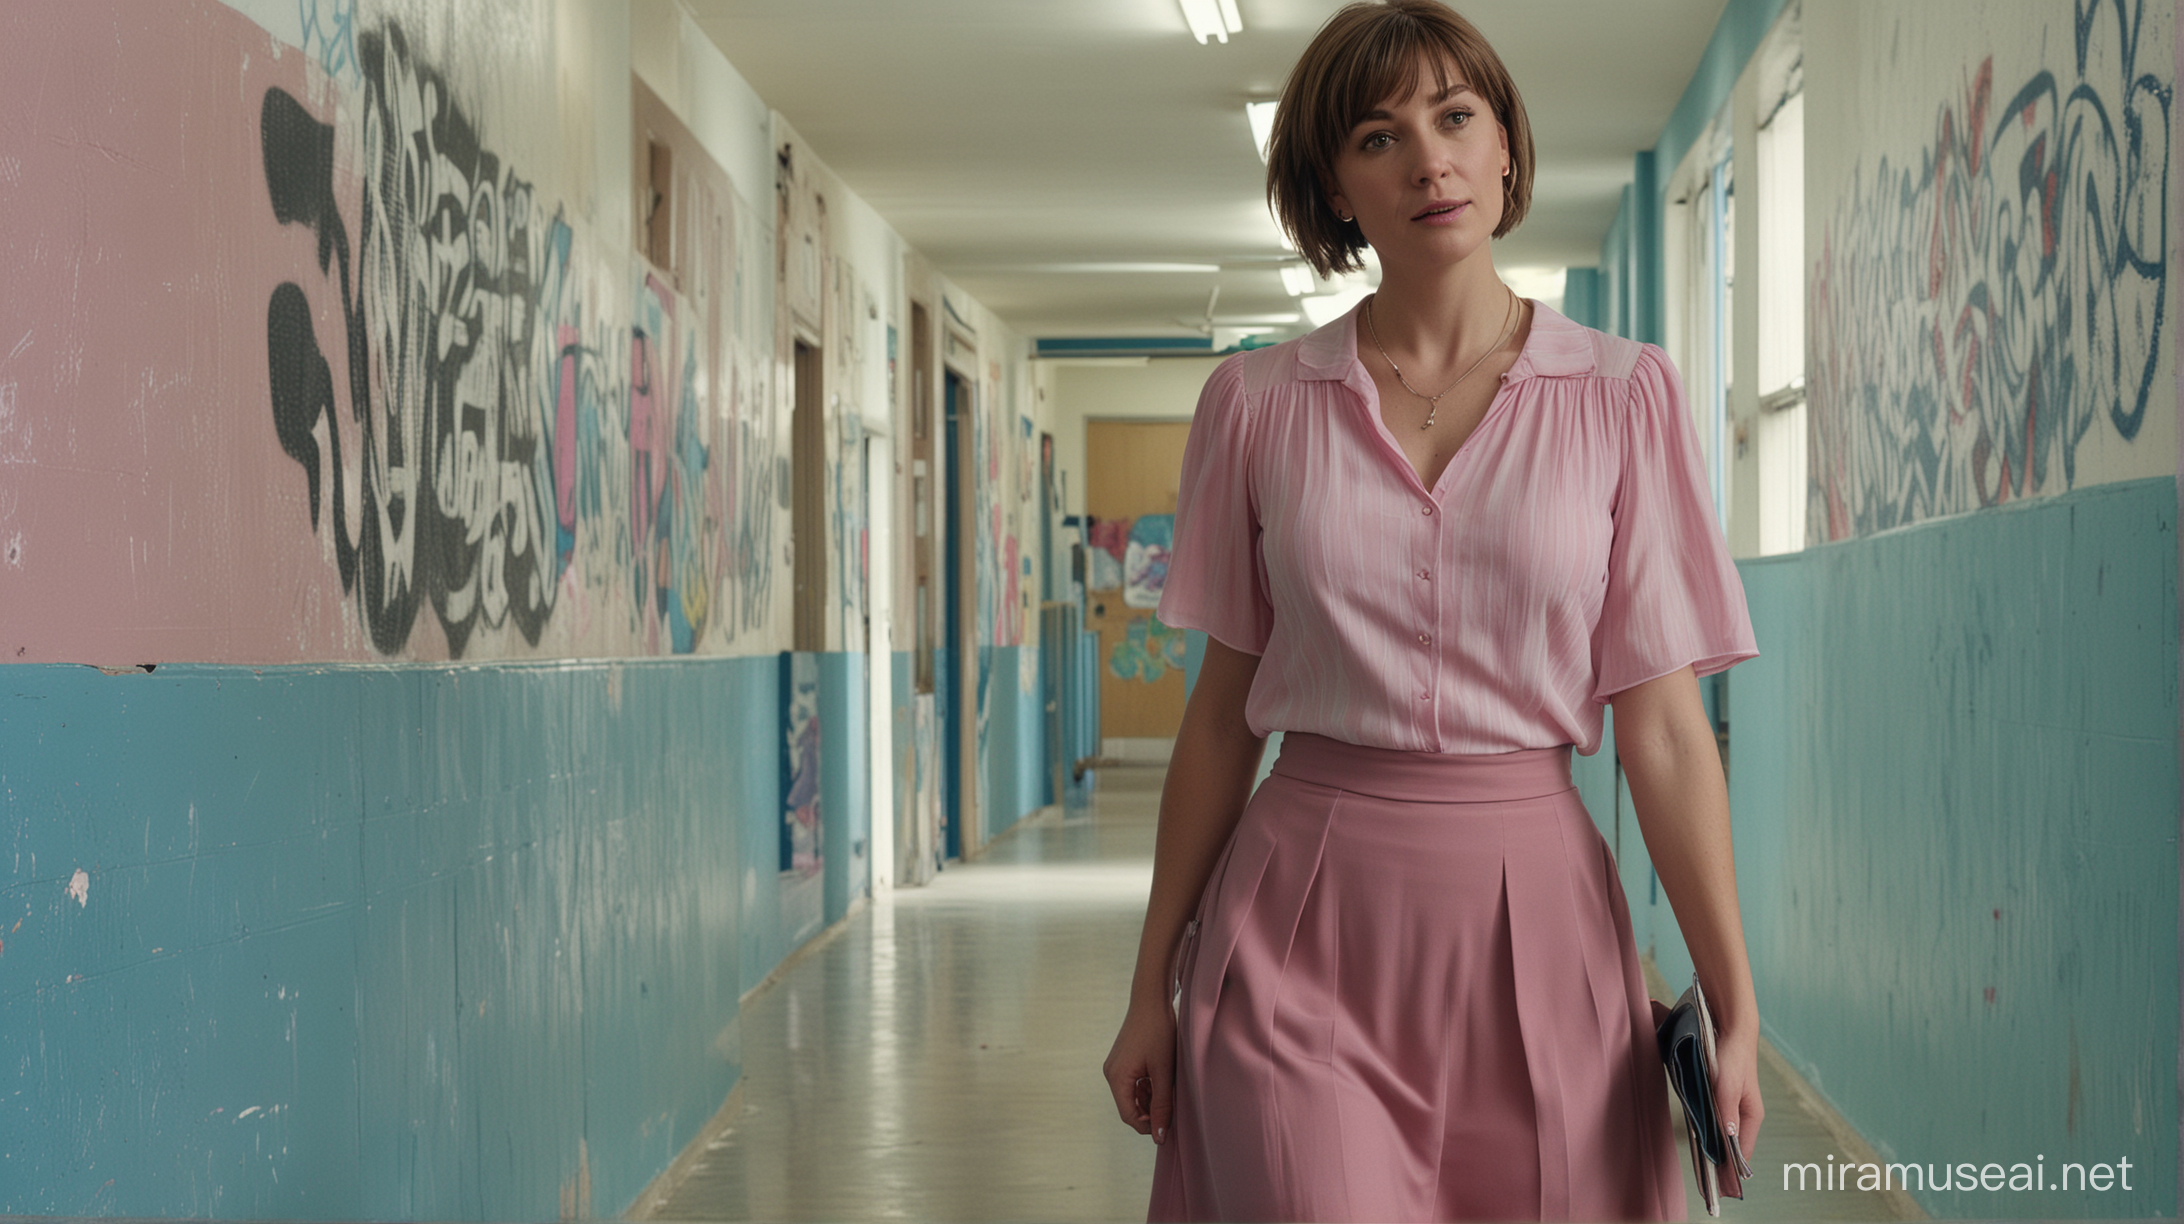 photo, cinematic still, low angle, a female teacher, middle aged, wrinkles, extremely wide big hips and a thin waist, short brown hair, walking down a high school hallway carrying books, wearing a pink blouse, long blue skirt, necklace, looking at the camera, graffitti on the walls